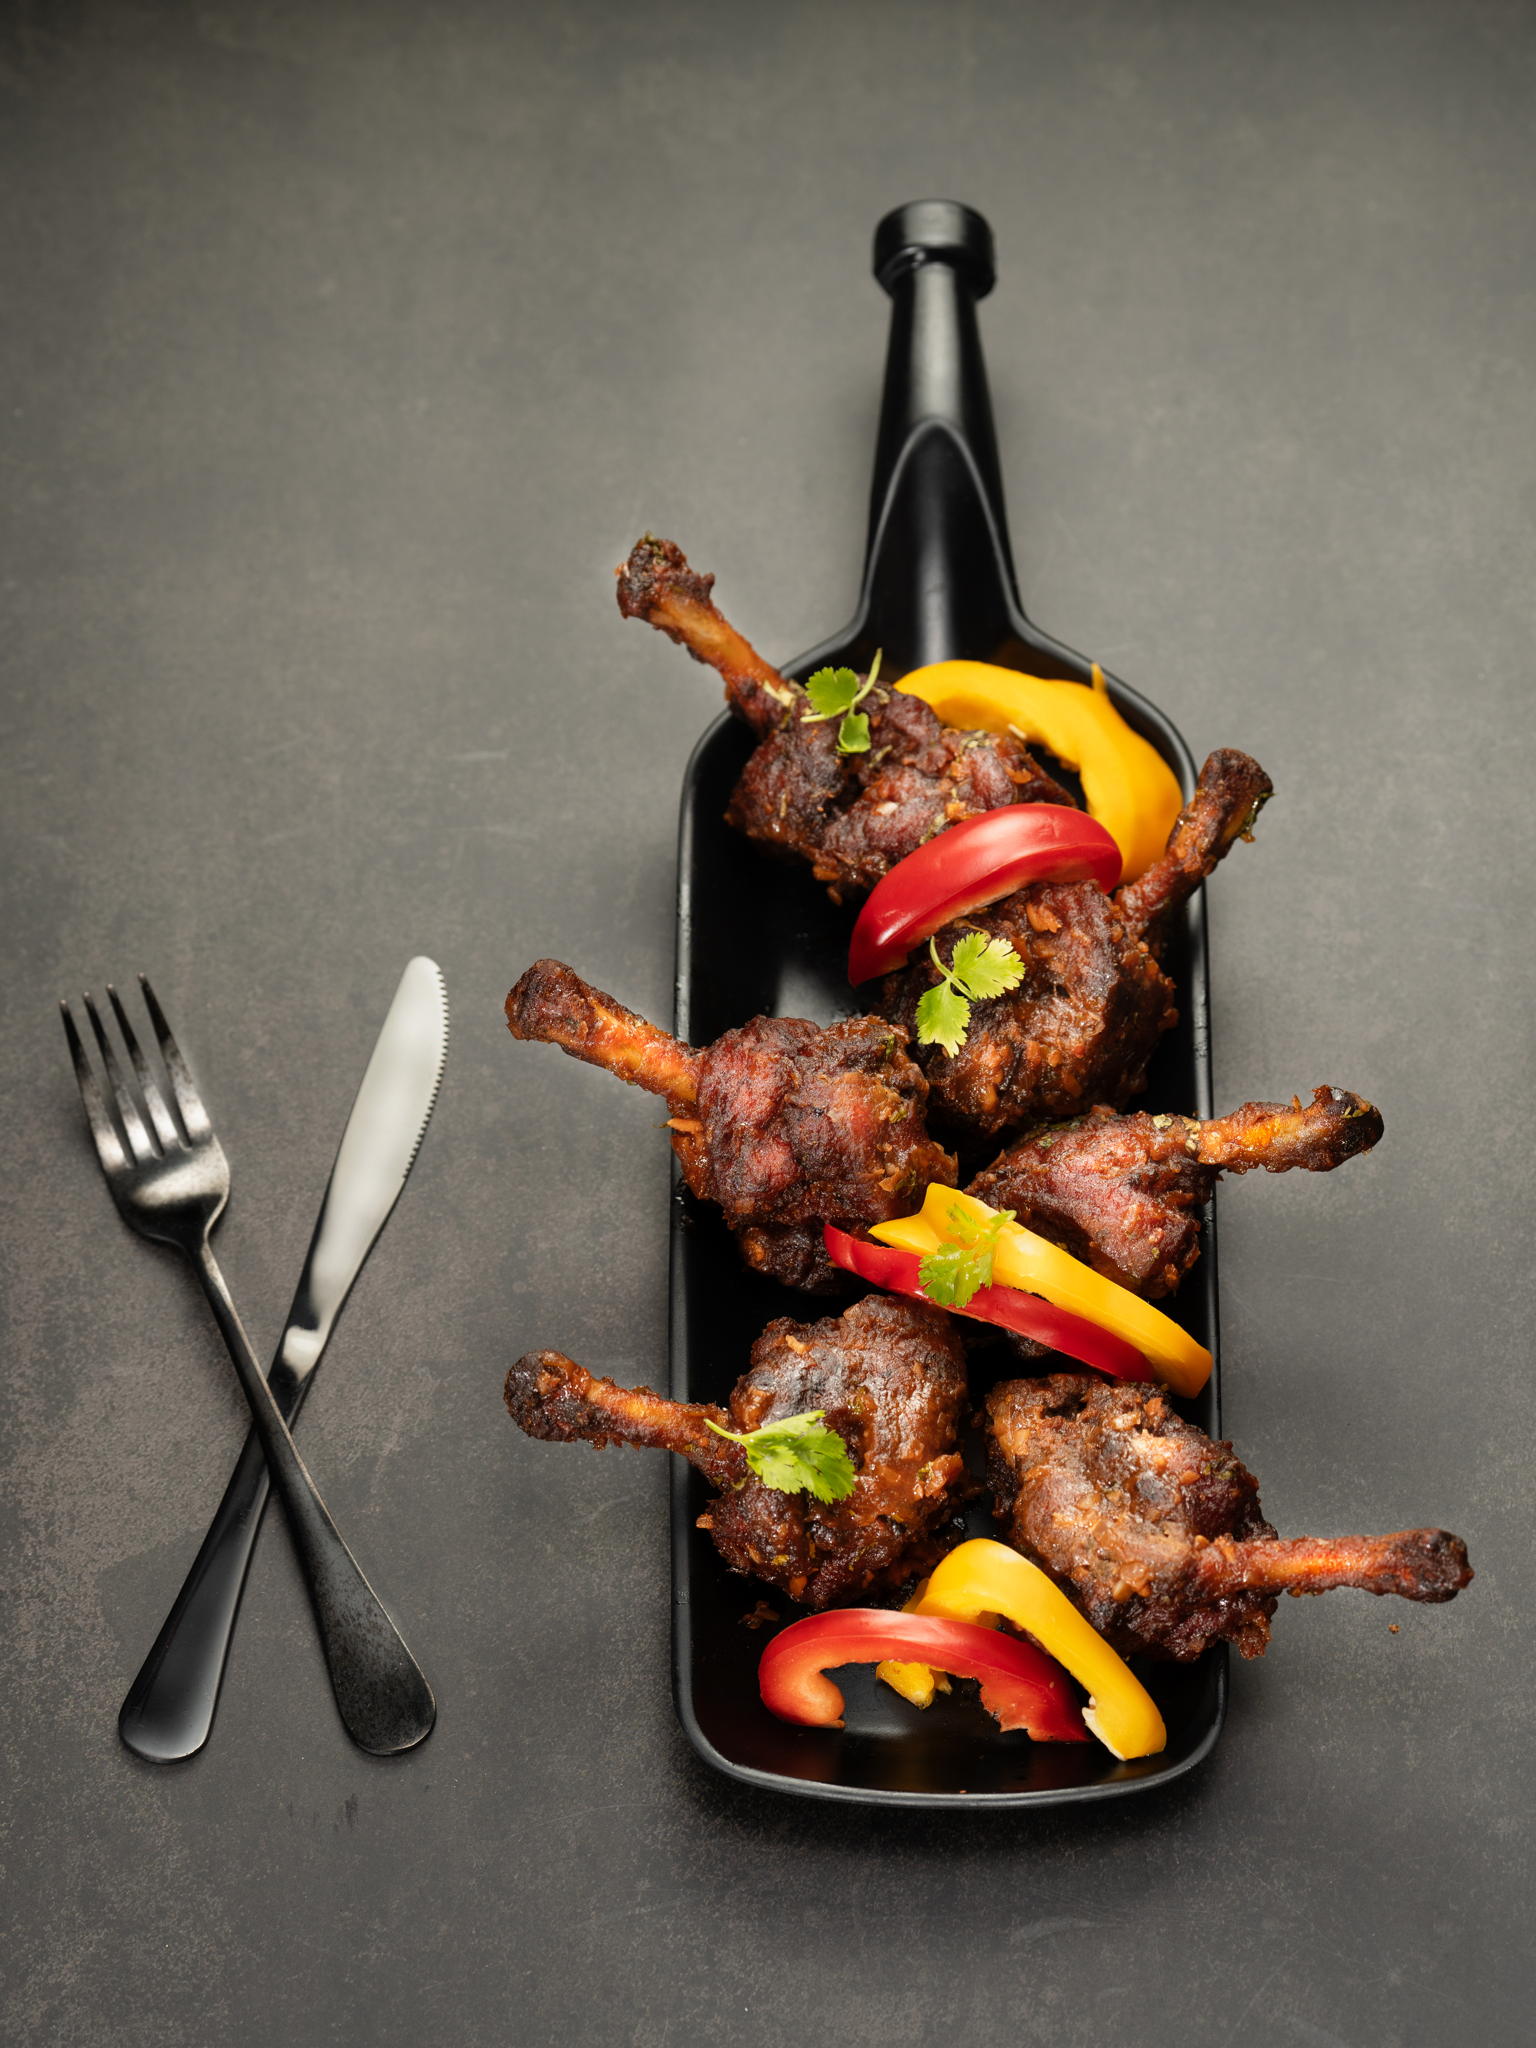 Skewers of chicken lollipops and colorful bell peppers on a metal tray with a red napkin, knife, and fork